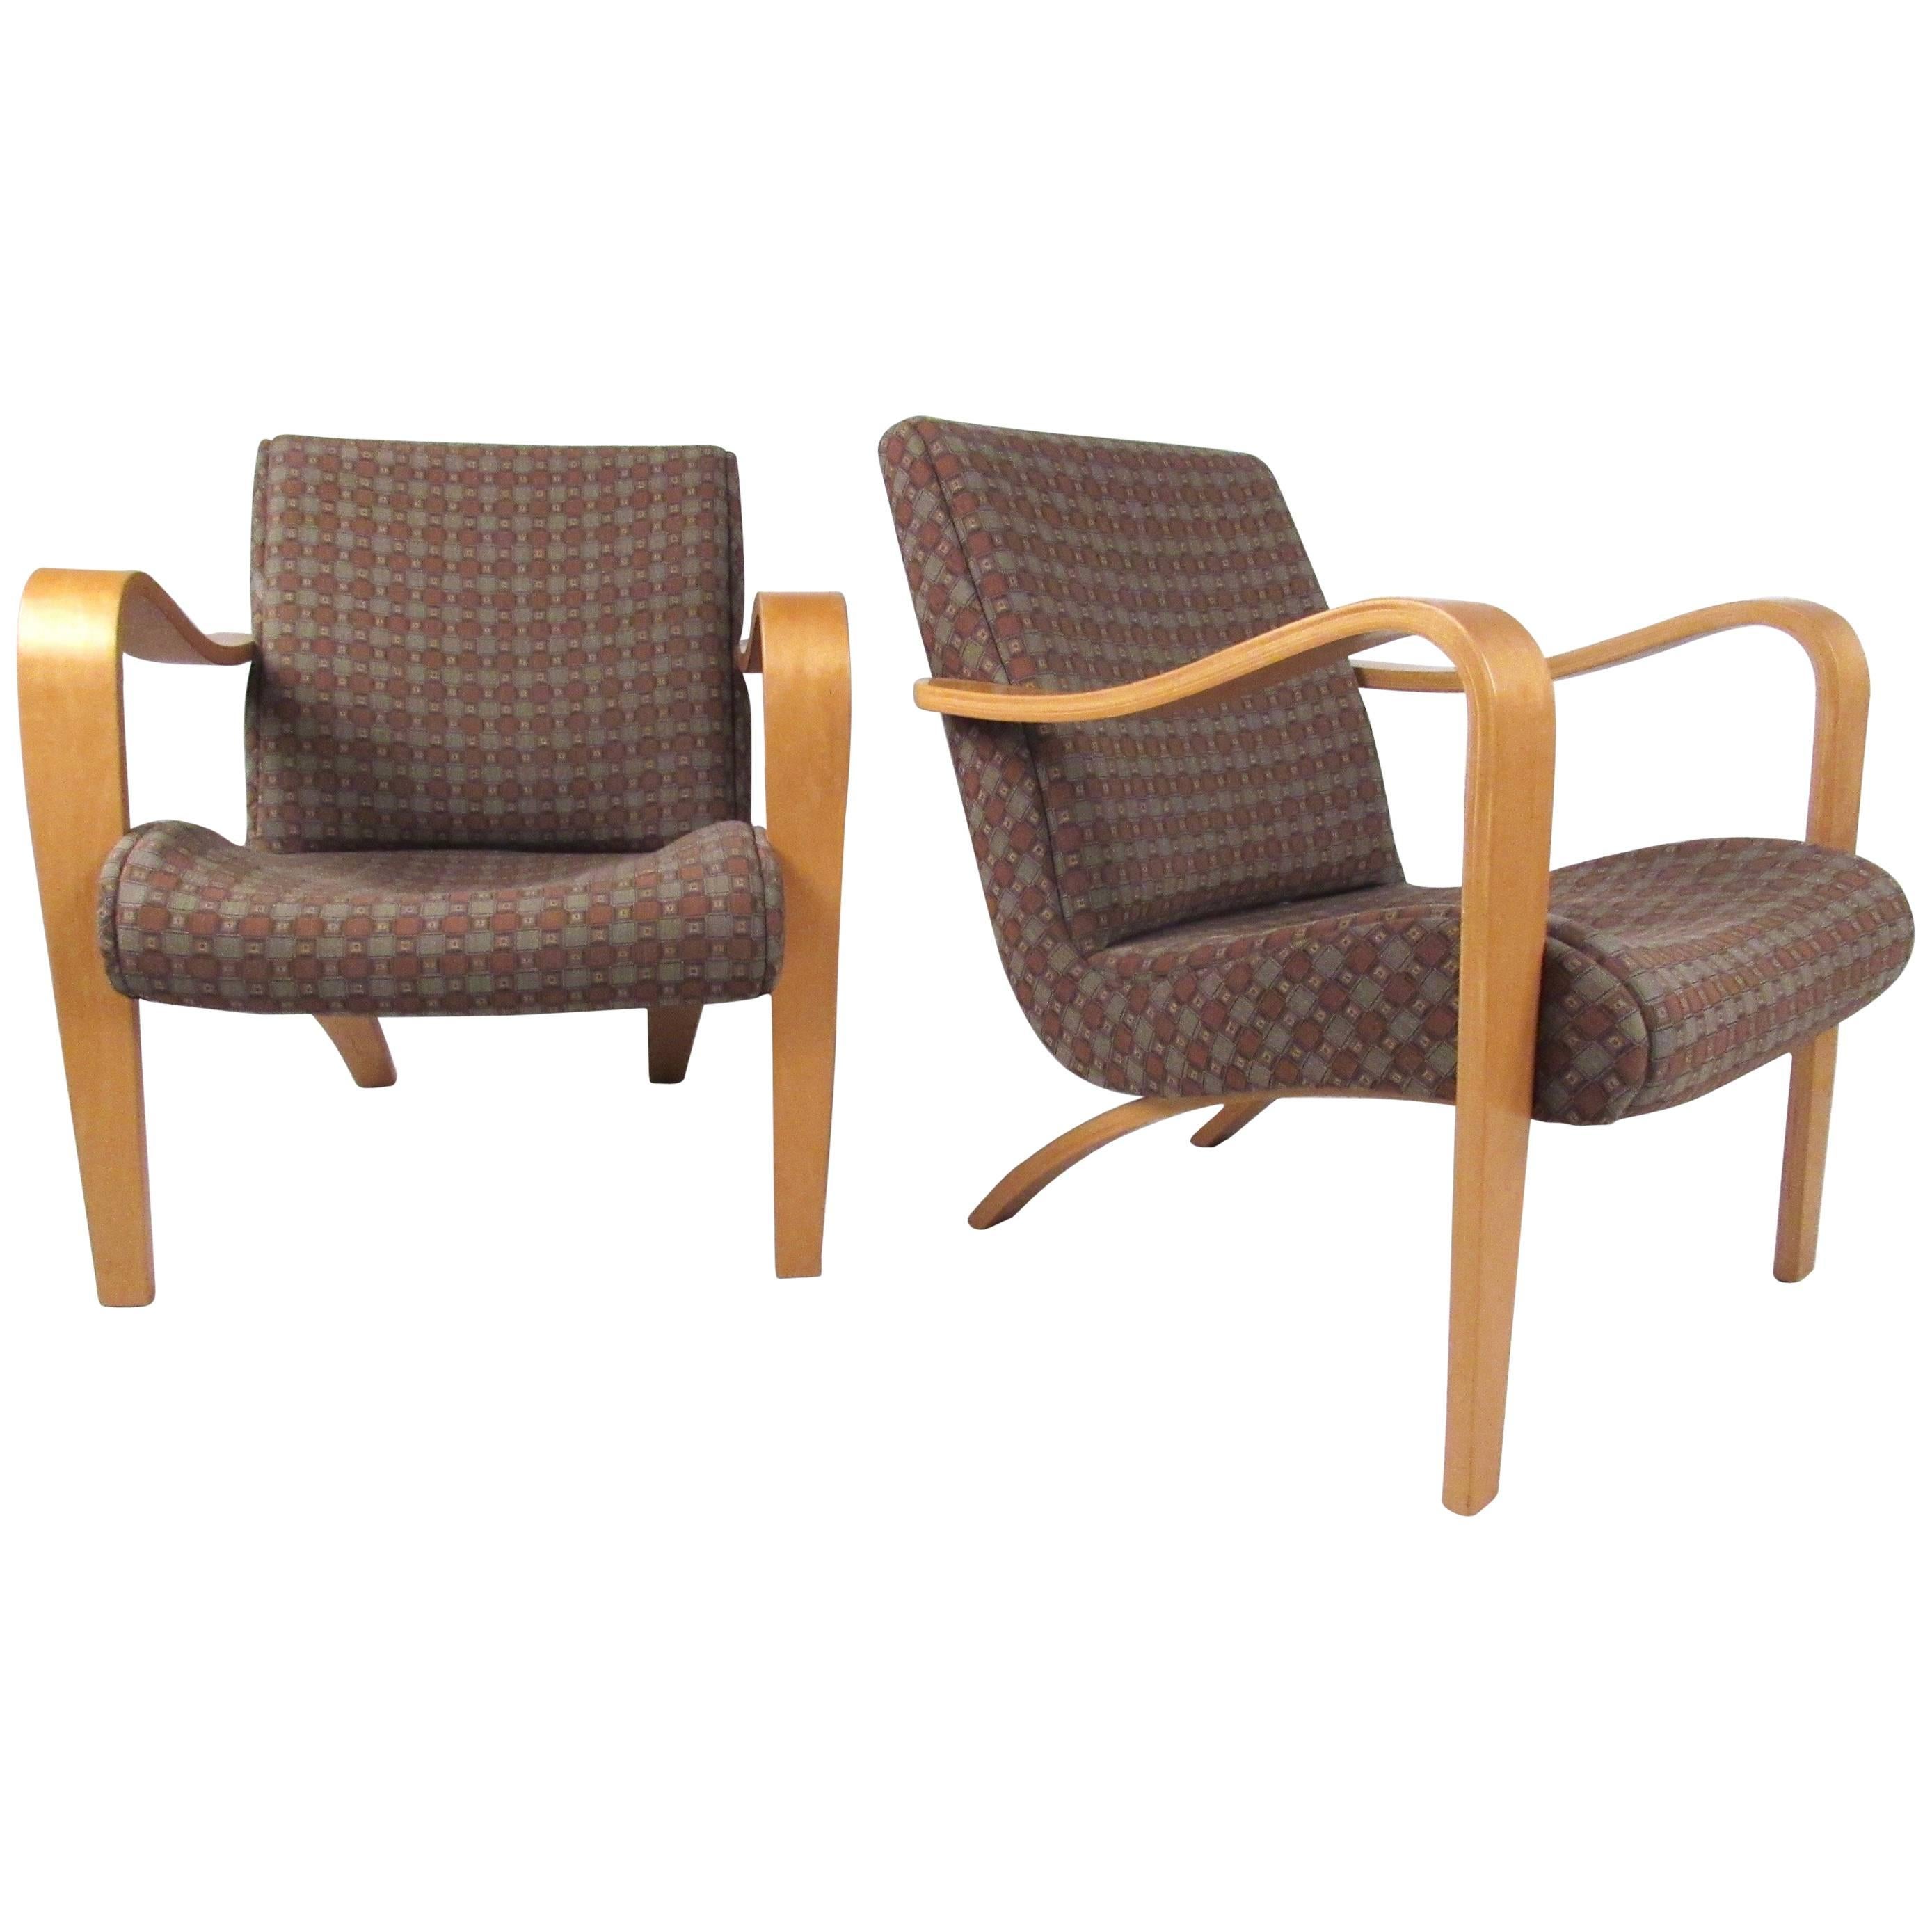 Pair of Thonet Lounge Chairs